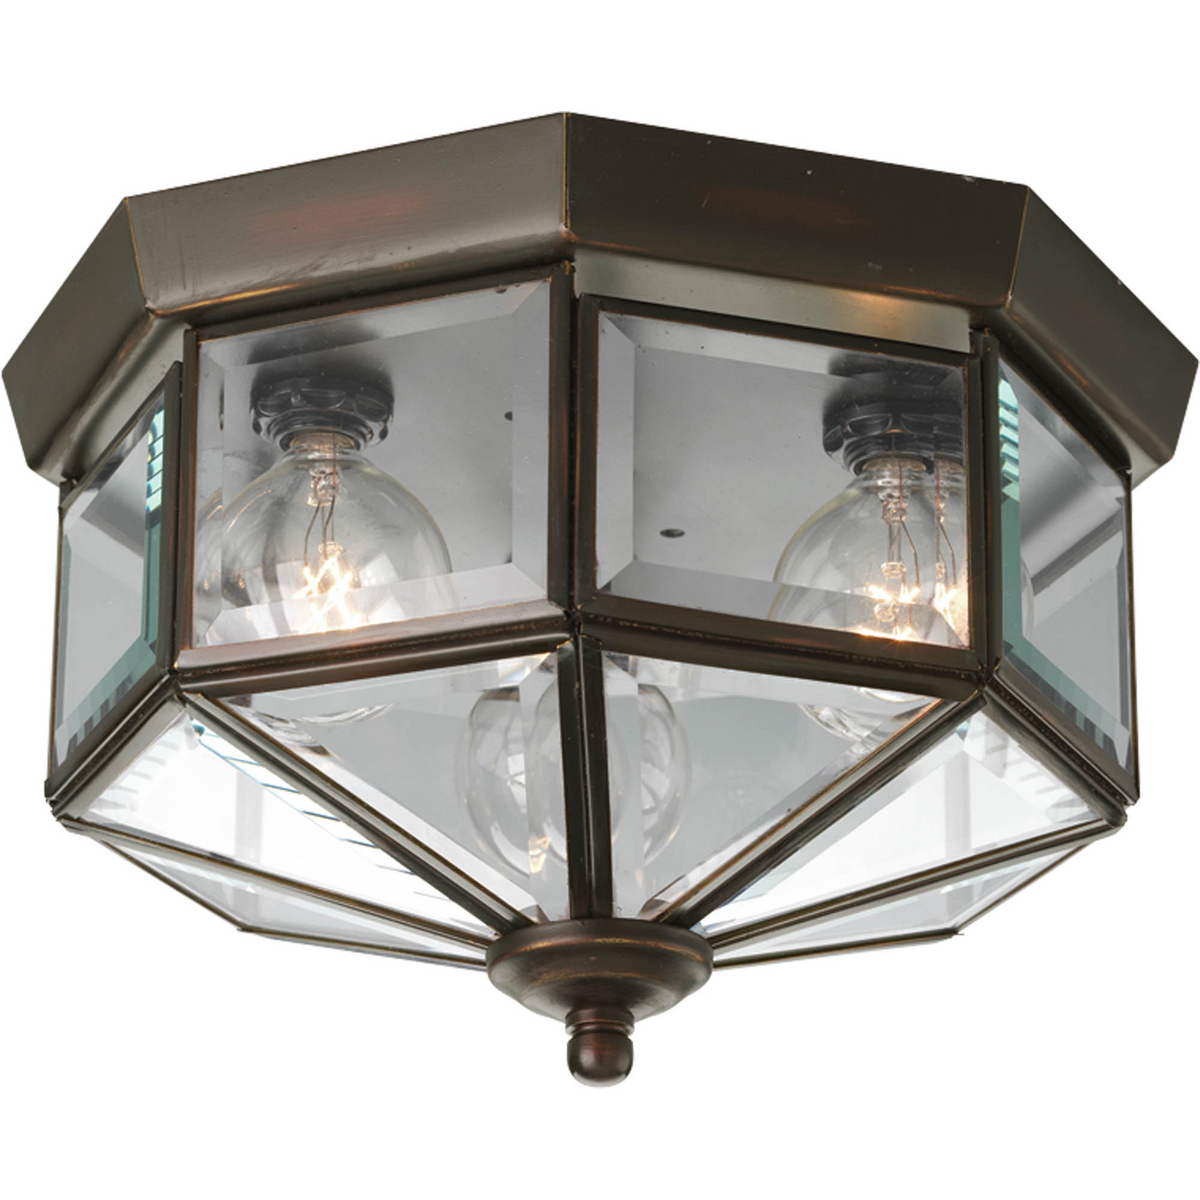 Three-light octagonal close-to-ceiling fixture with clear, bound beveled glass. Solid brass construction. G-lamps recommended. Traditional styling perfect for halls, closets, porches, laundry rooms, bedroom. Antique Bronze finish.